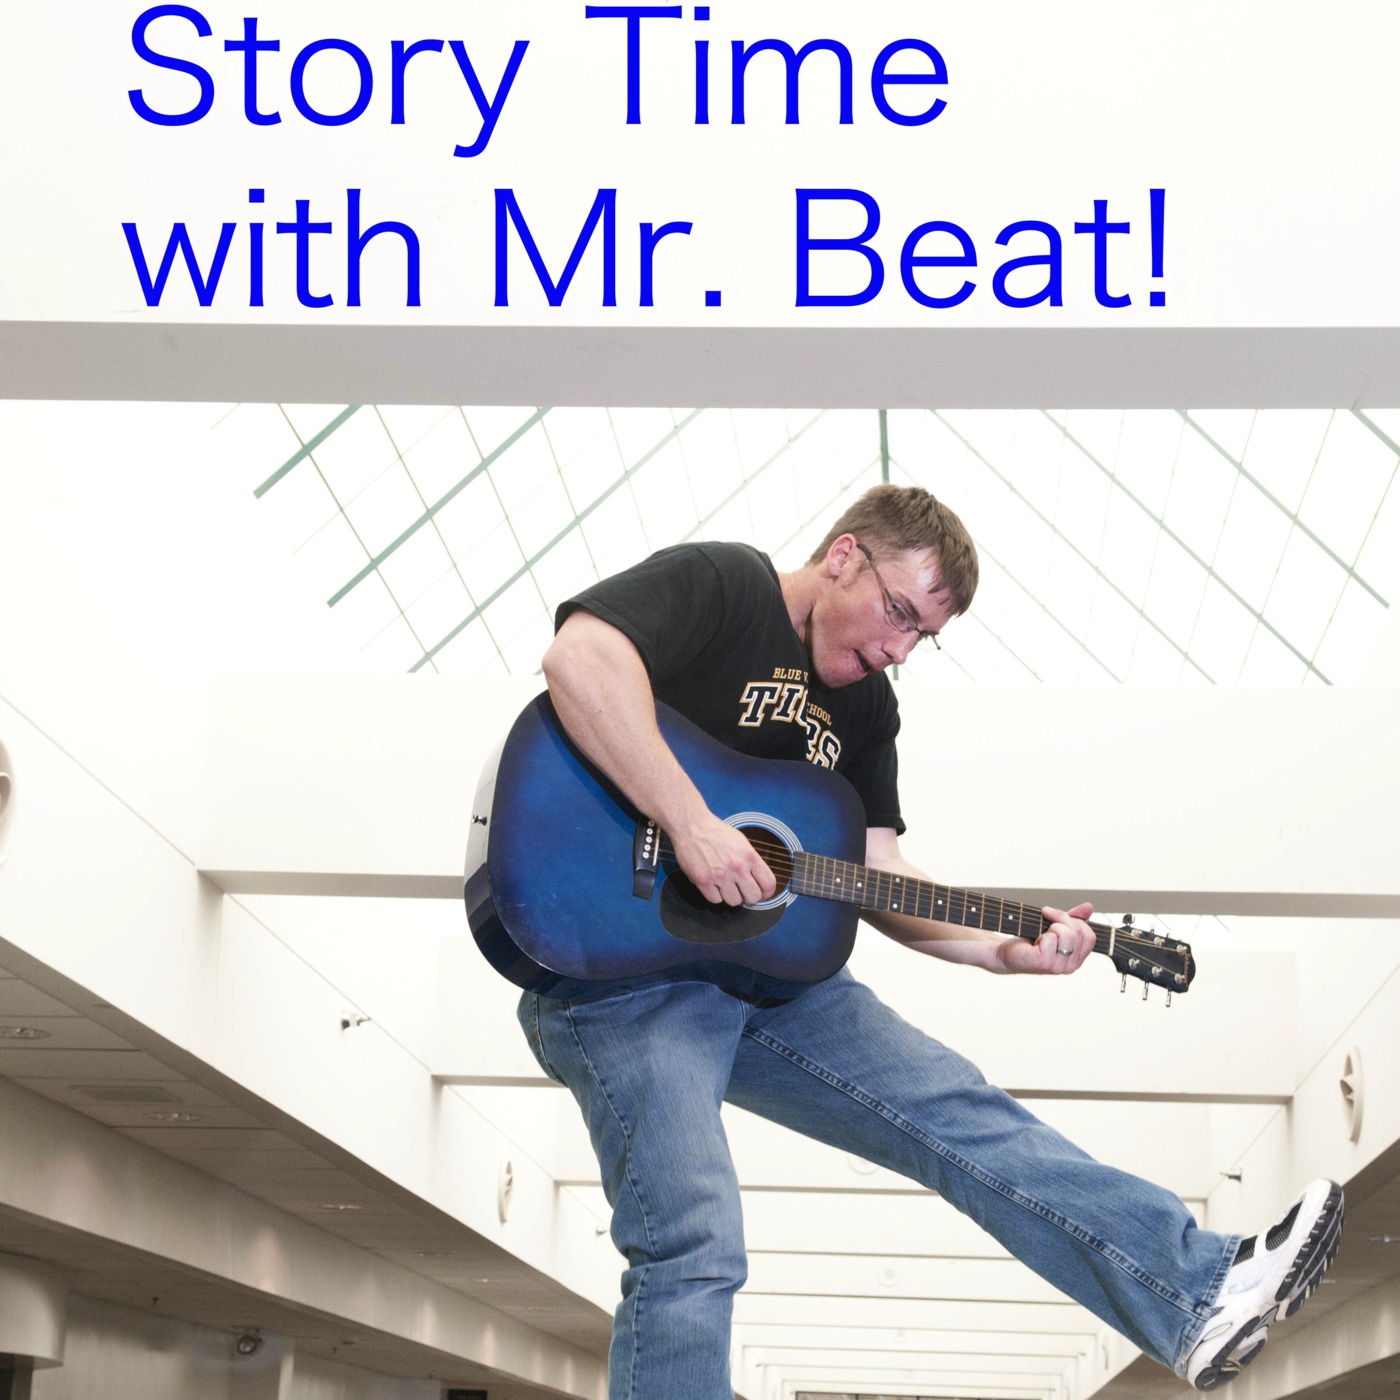 Story Time with Mr. Beat